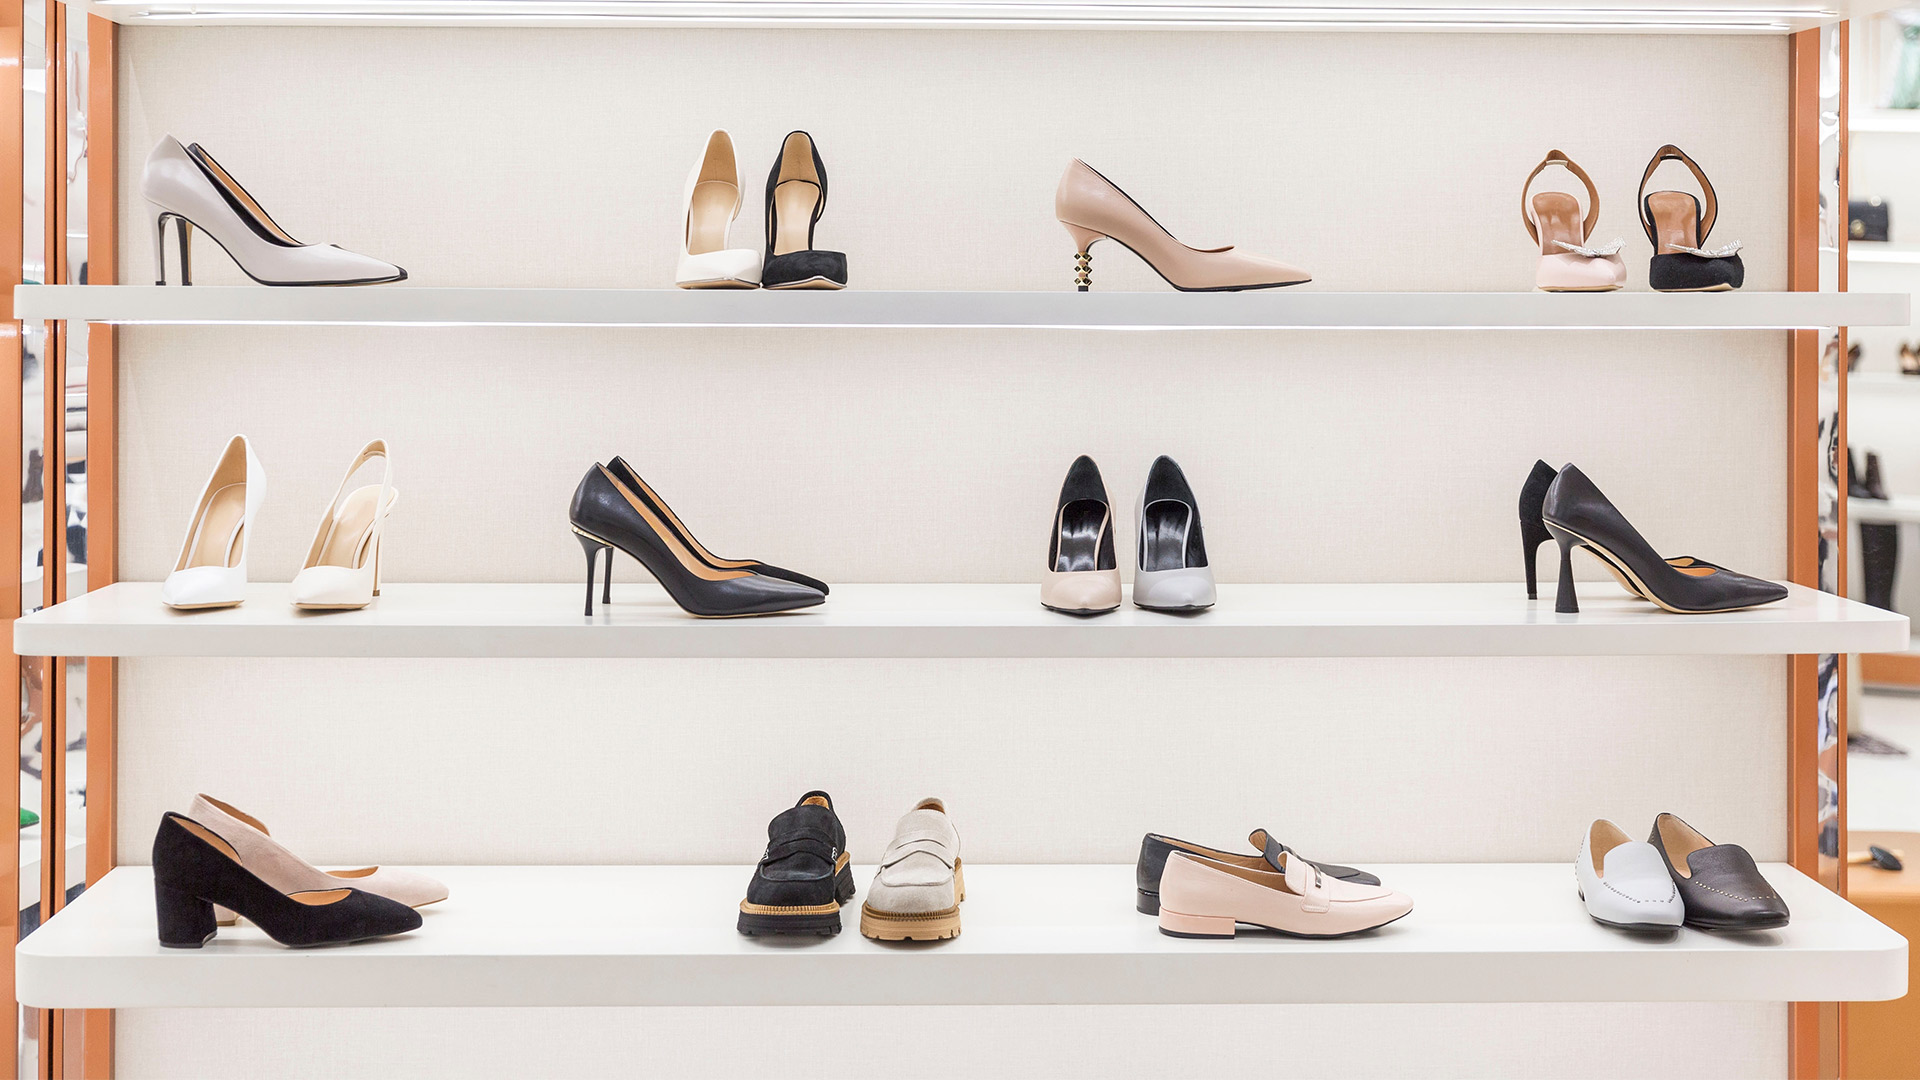 A display of the latest women's footwear from one of the best shoe brands